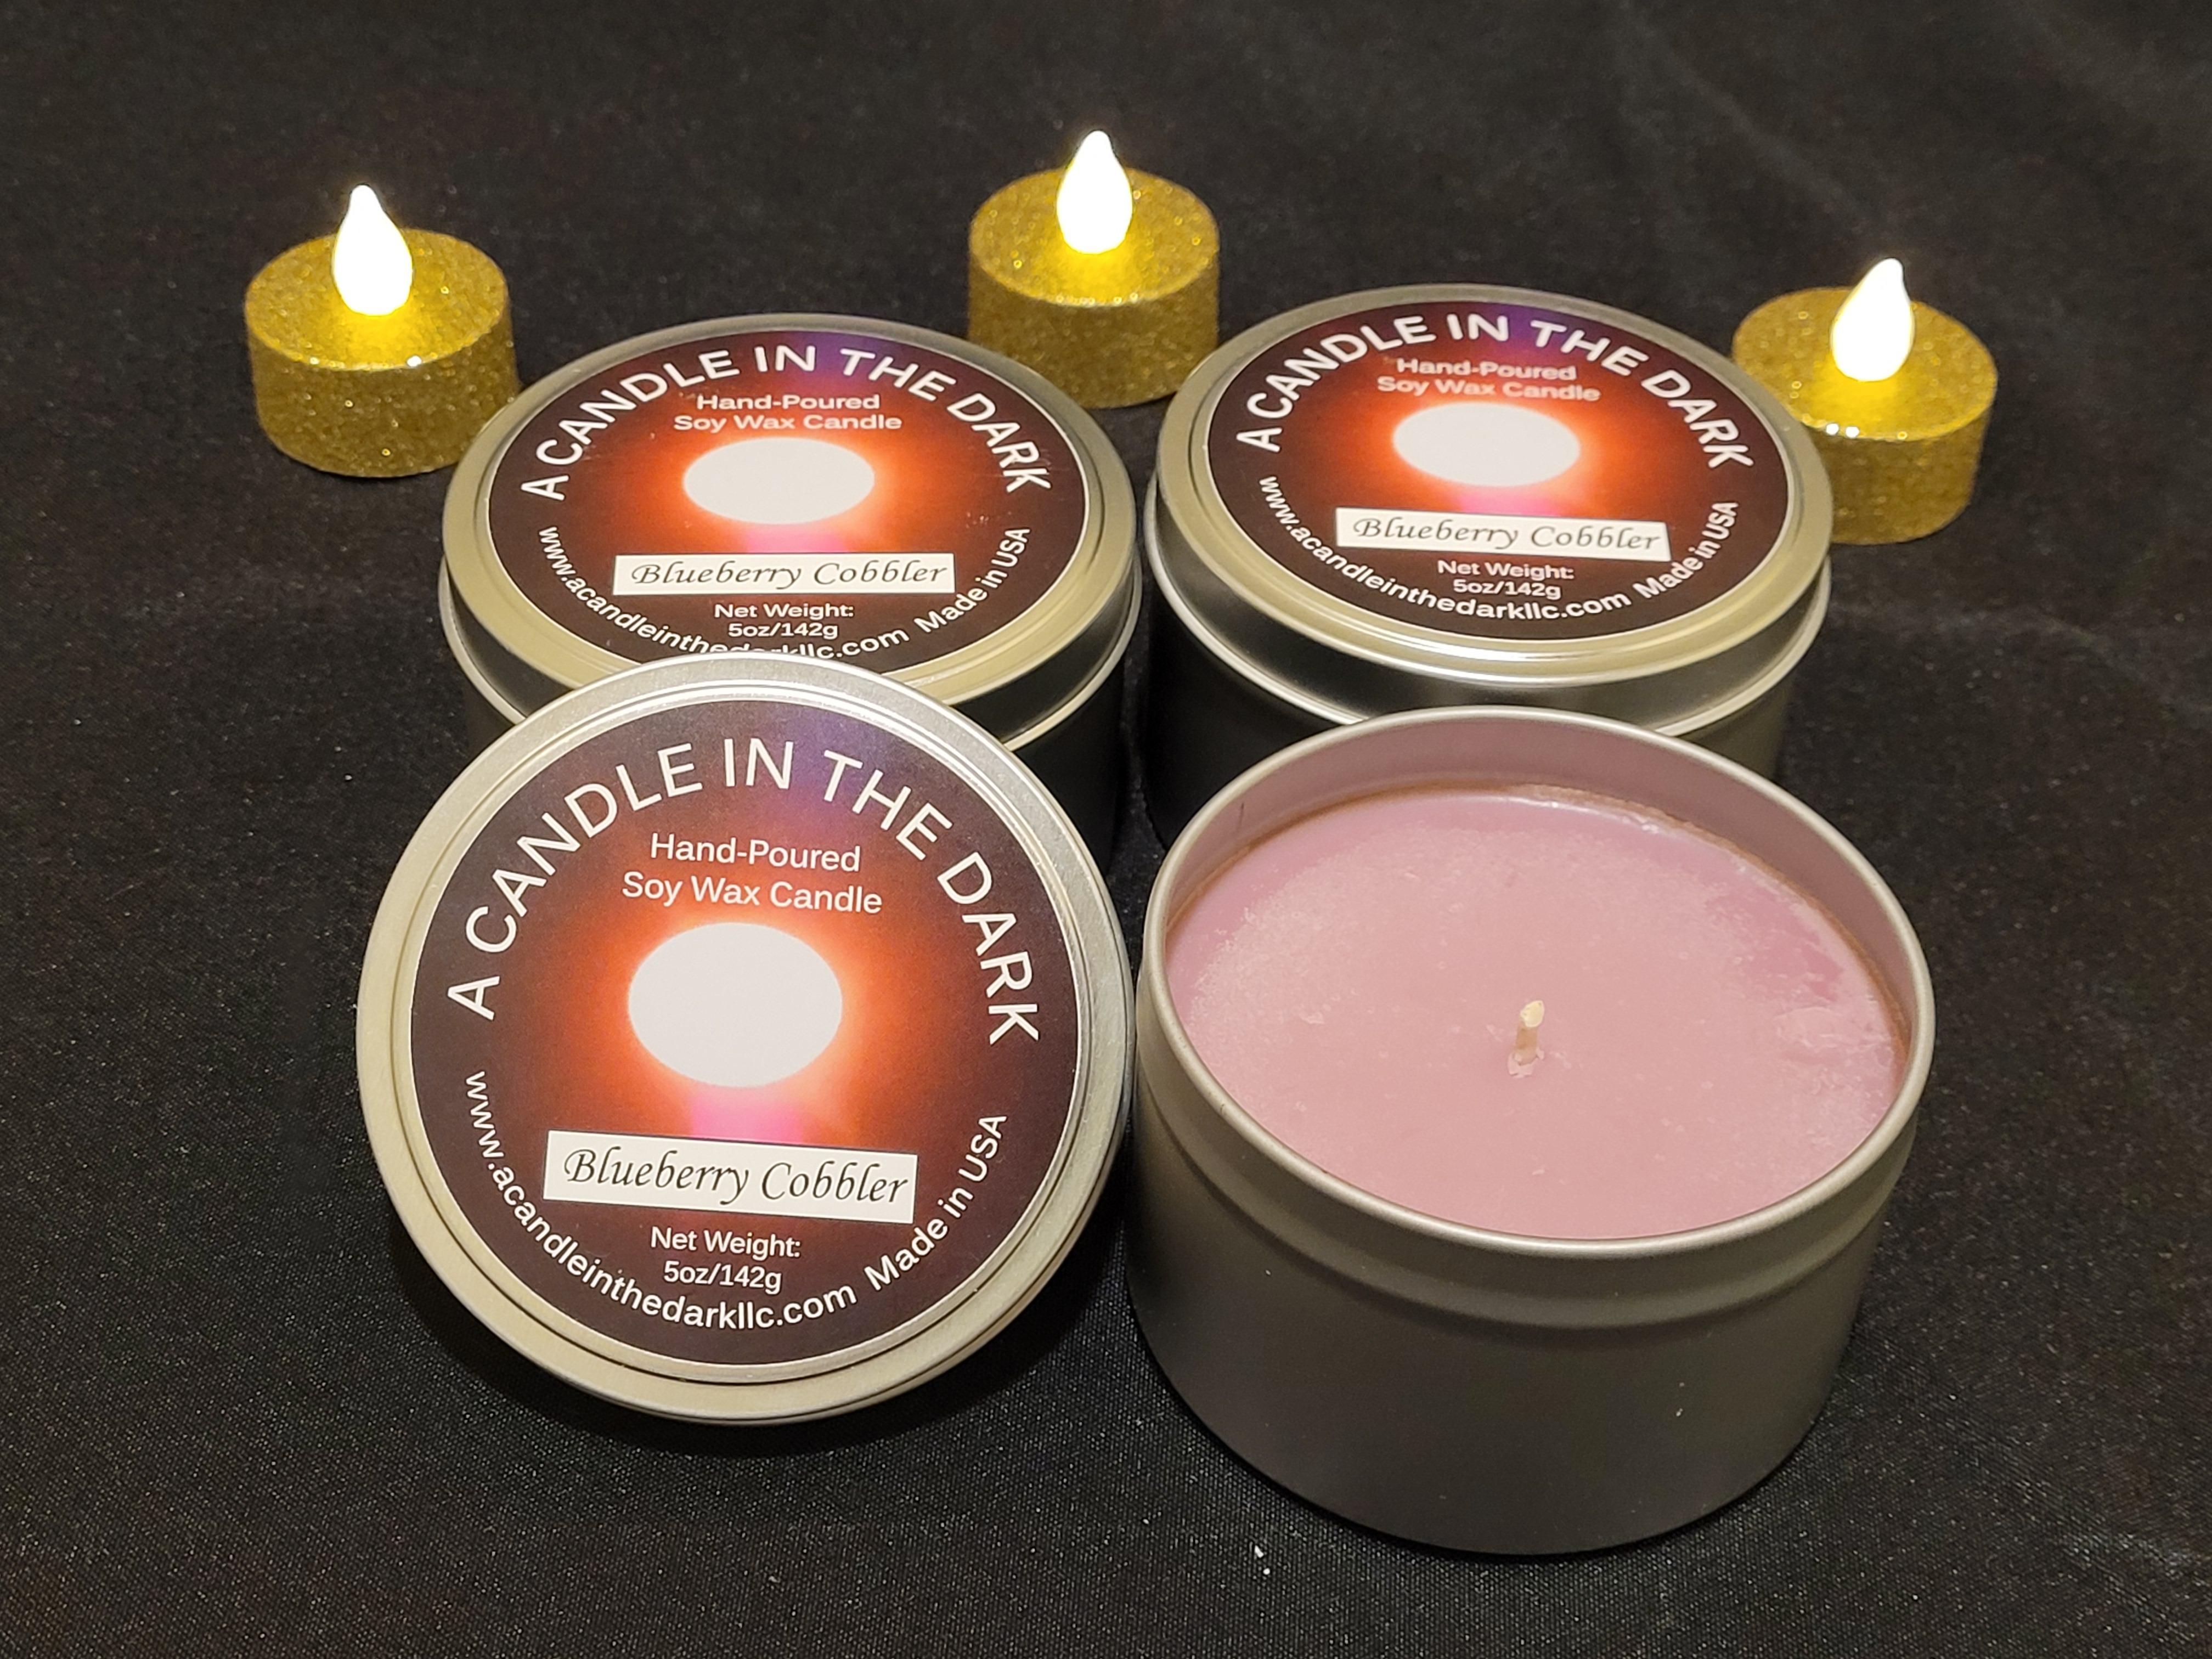 Blueberry Cobbler Scented Soy Candle – Gnome Hollow Candles